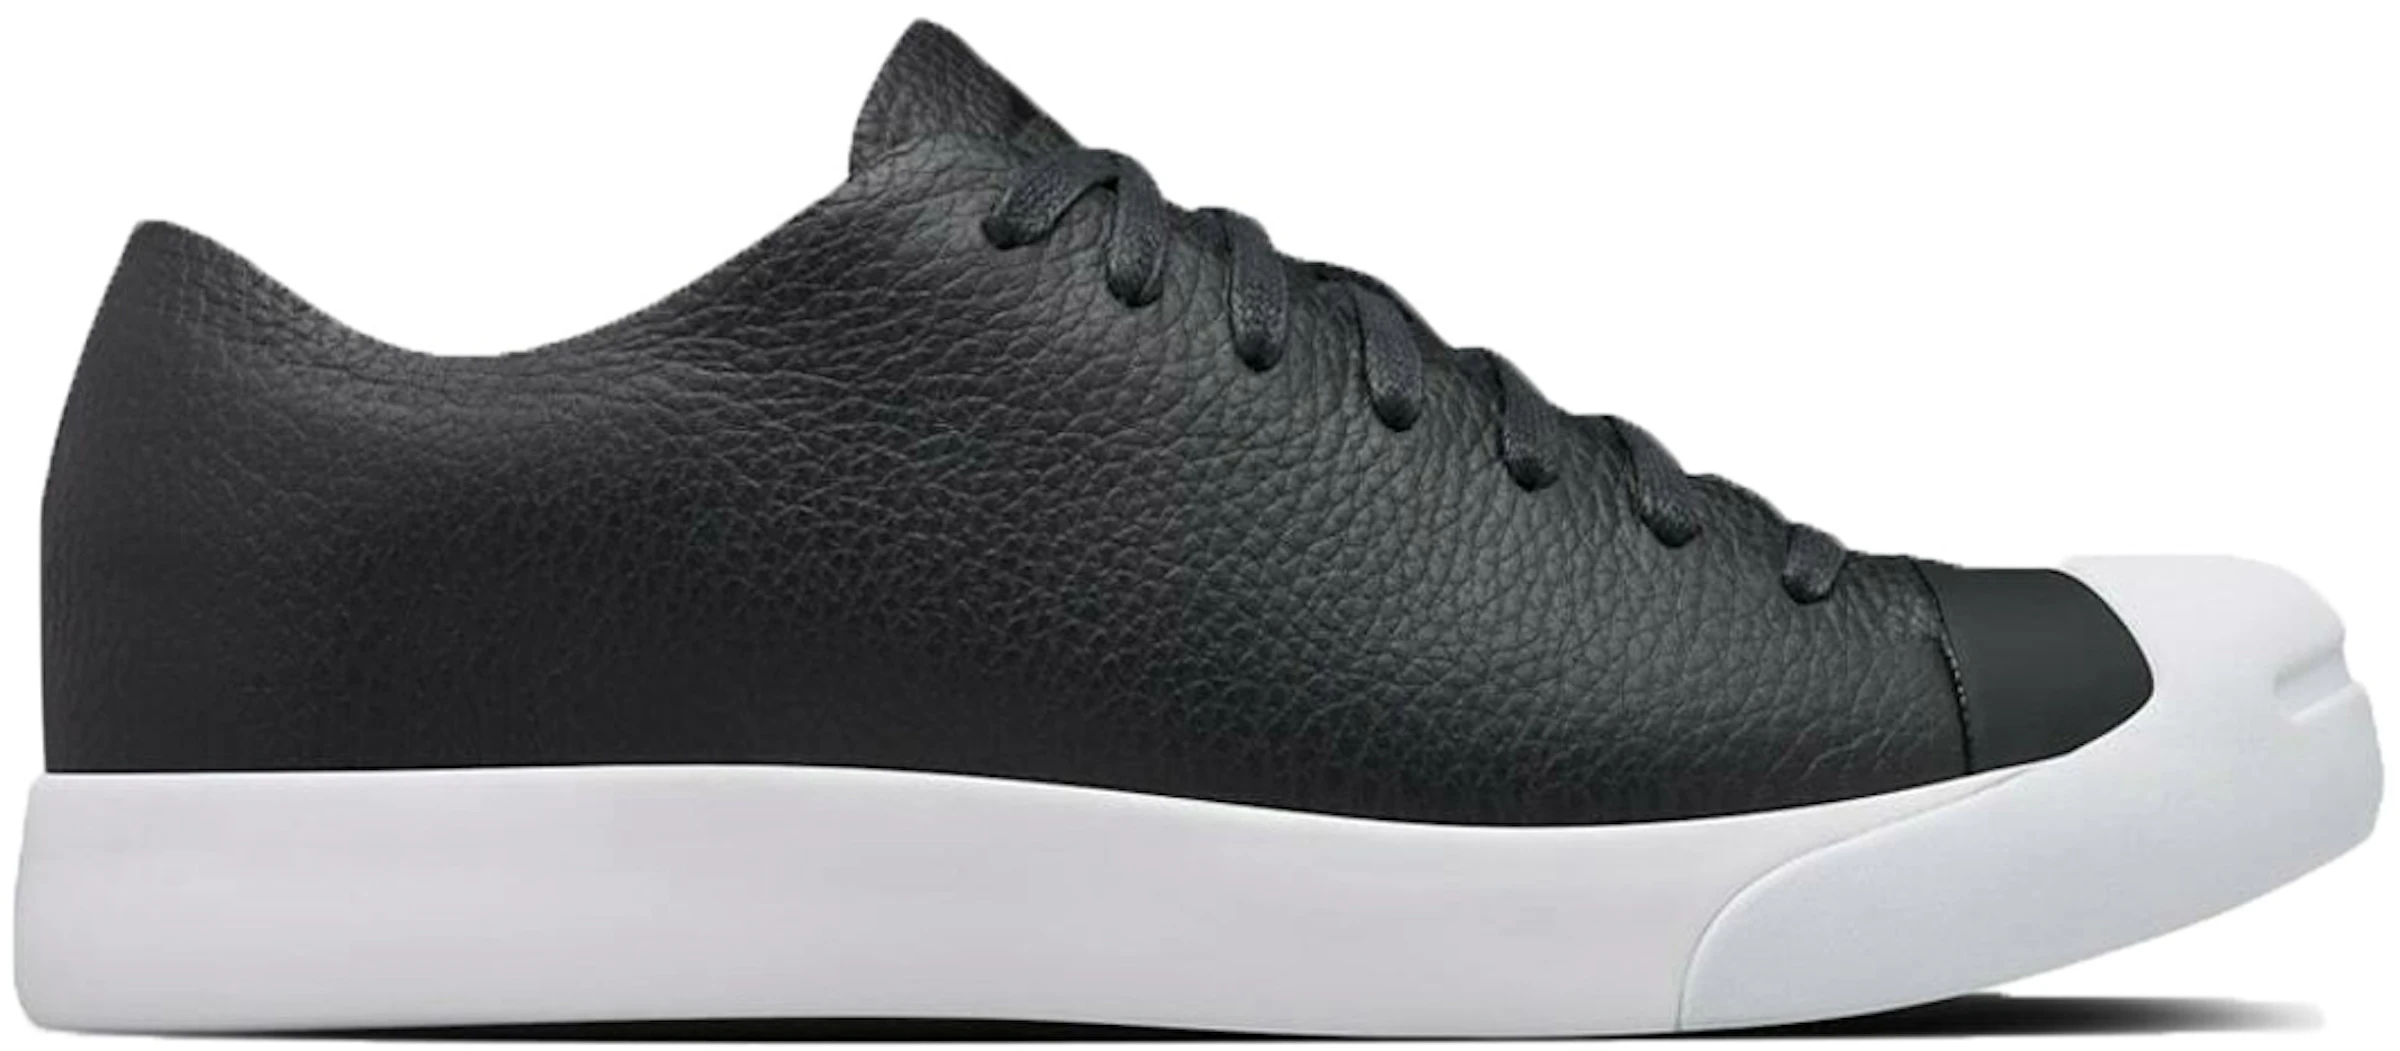 Converse Jack Purcell Modern HTM OX - 155018C -